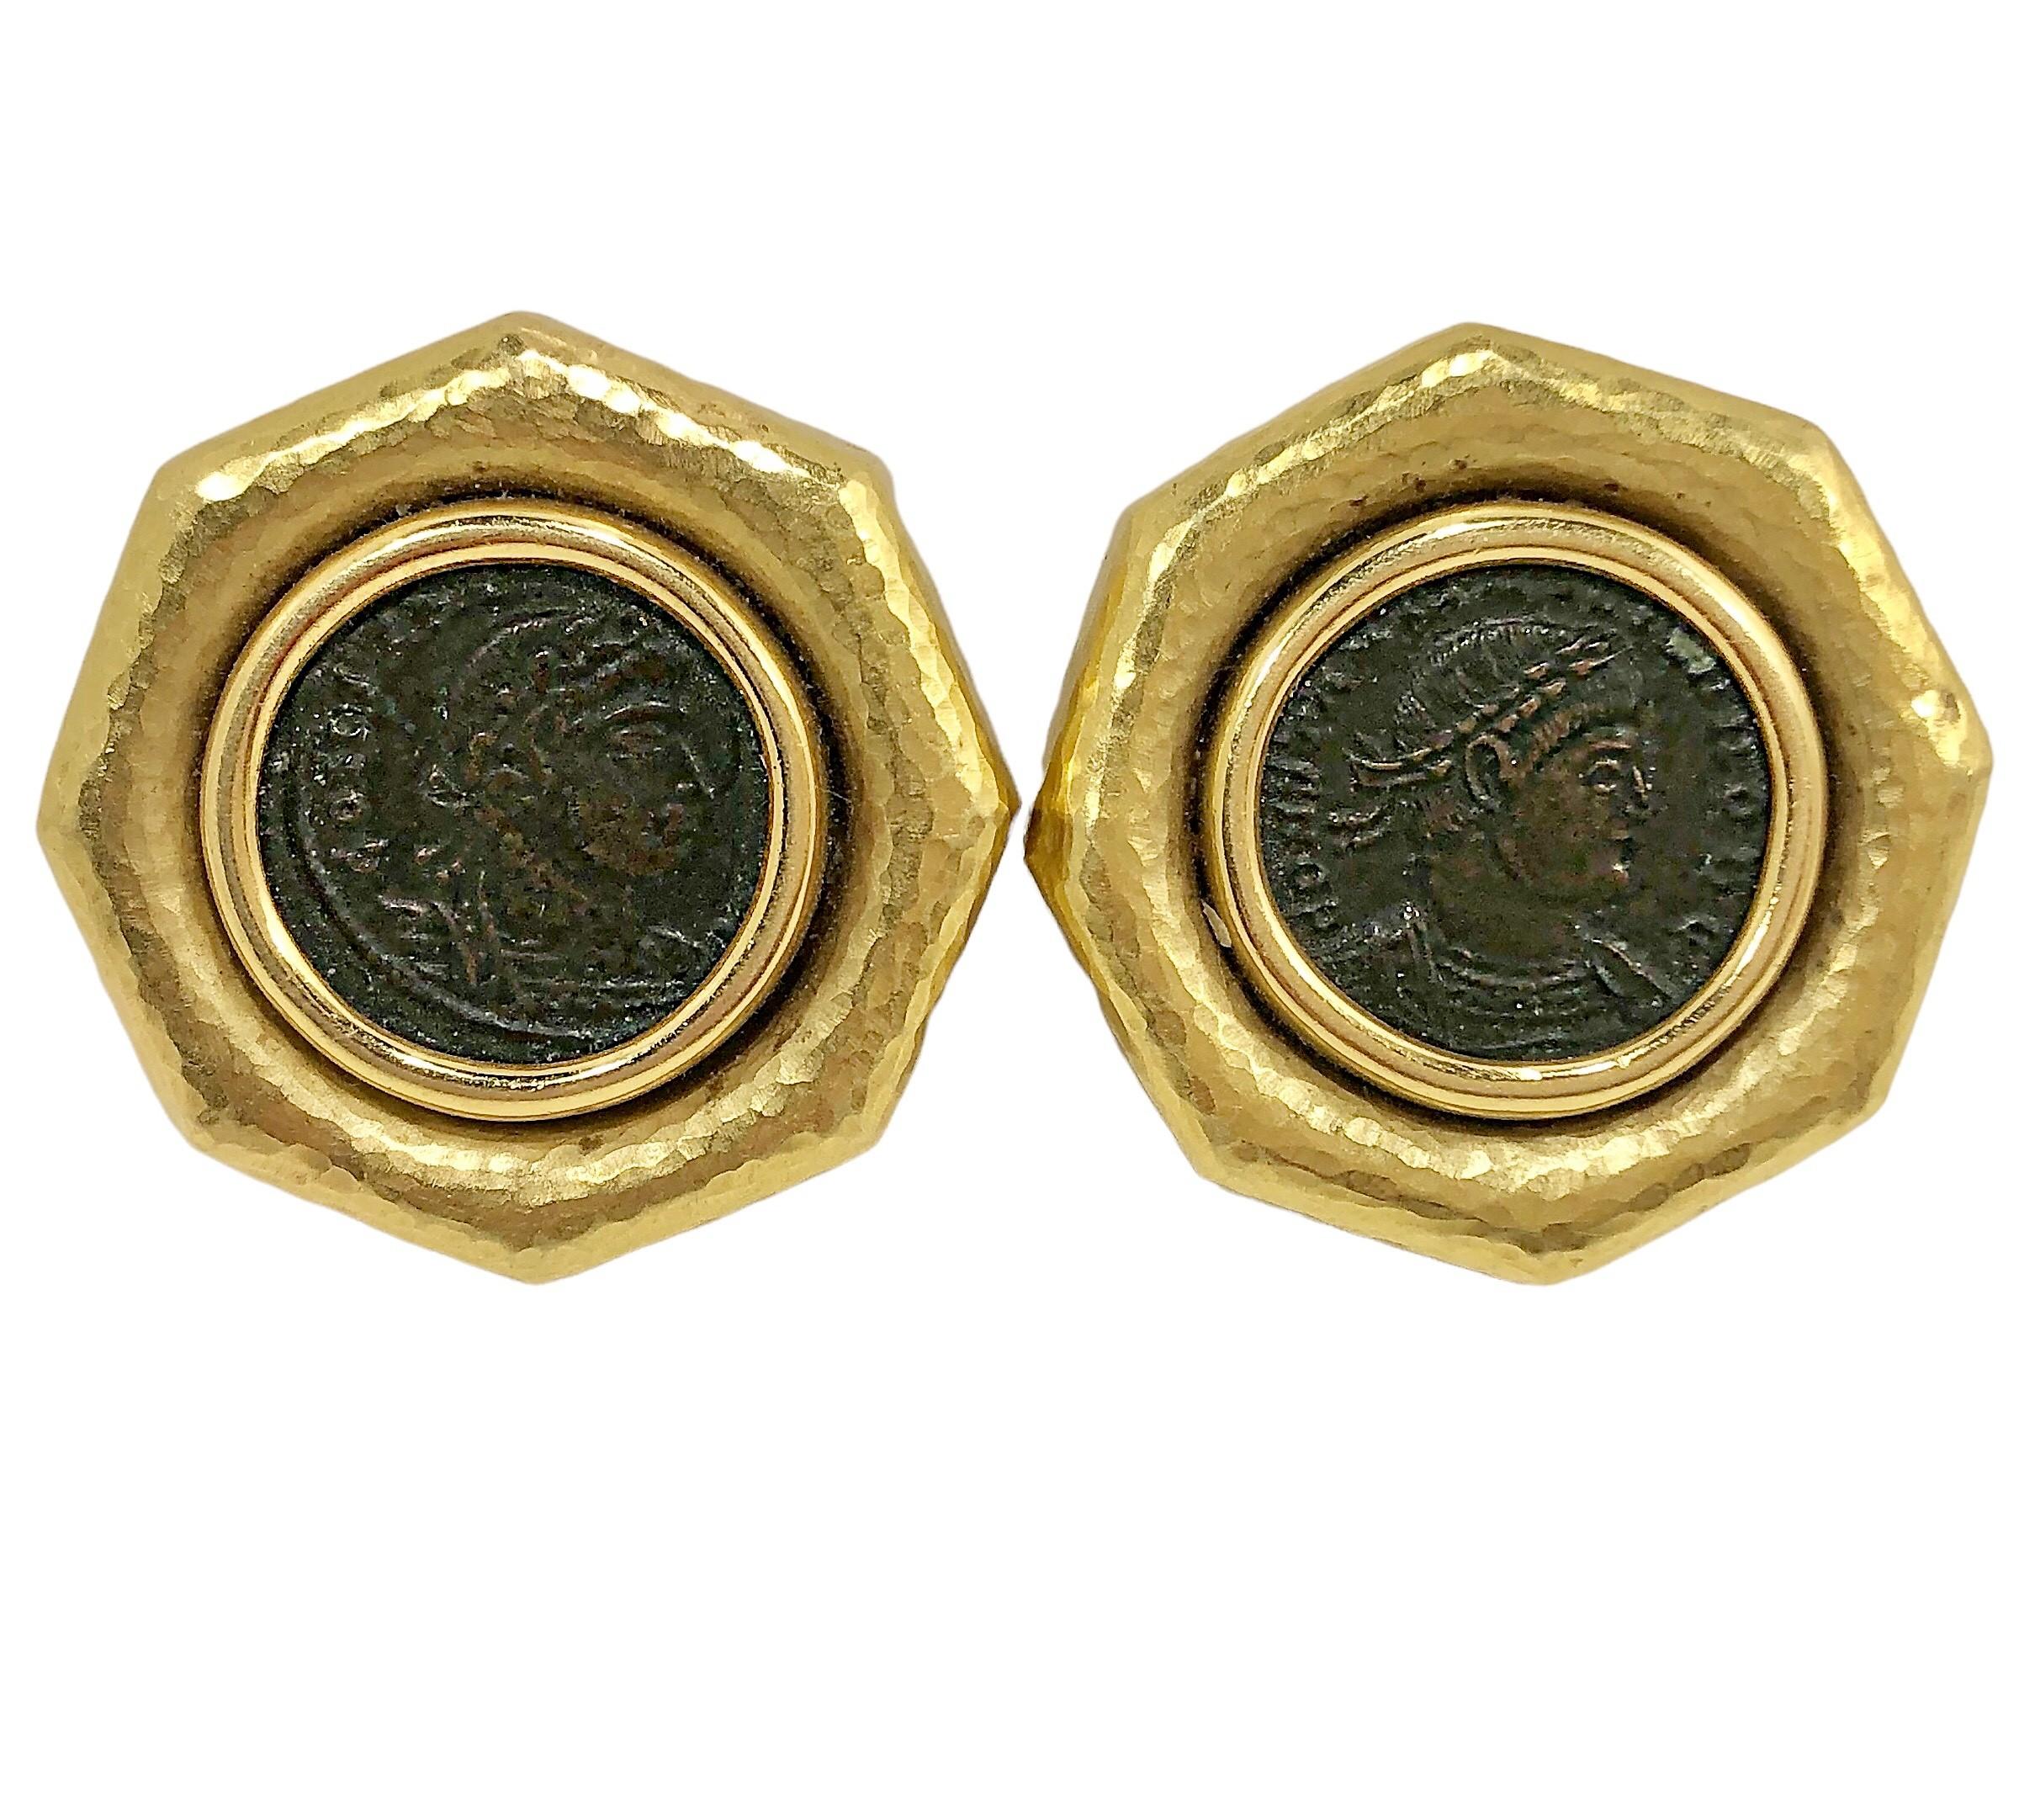 These impressive, hammered finish, 18K yellow gold earrings are set with ancient bronze bronze coins in the center. Point to point, their diameter measures  1 1/8 inches.  Stamped 18K and 750, and the Milan workshop mark. Backs are omega clip style.